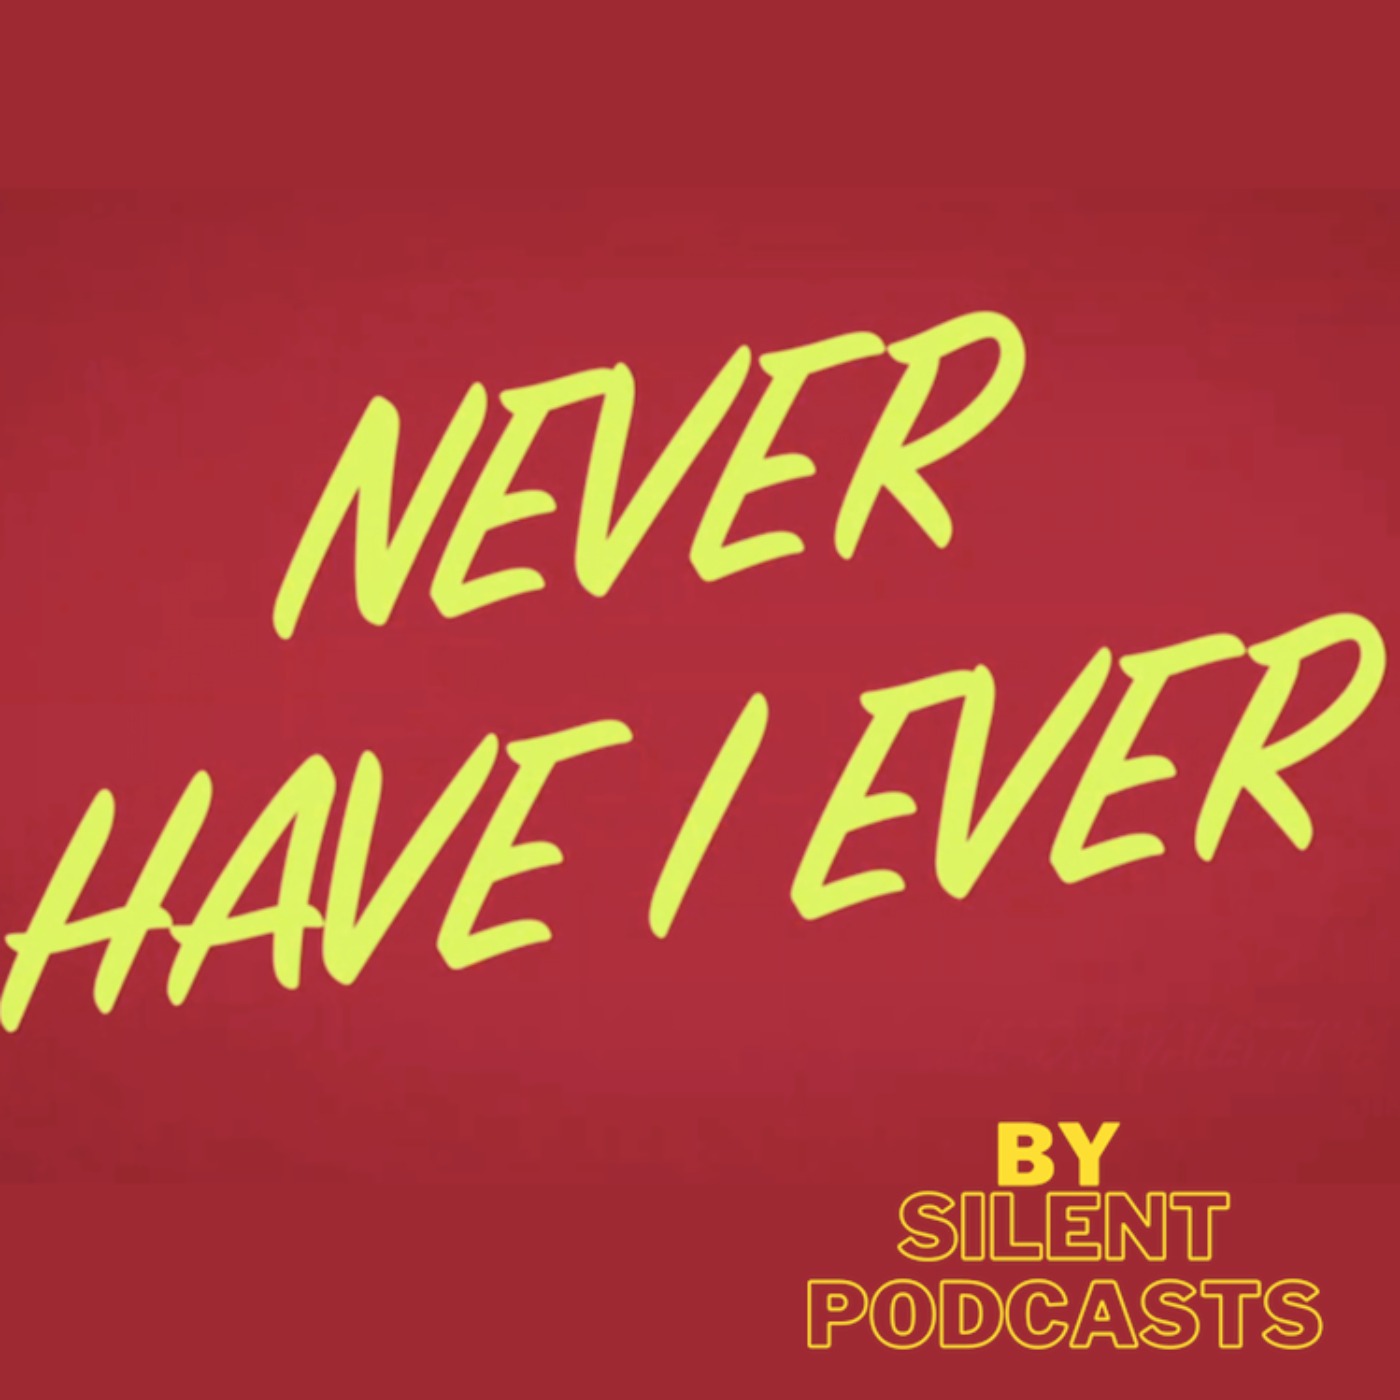 Never Have I Ever by Silent Podcasts